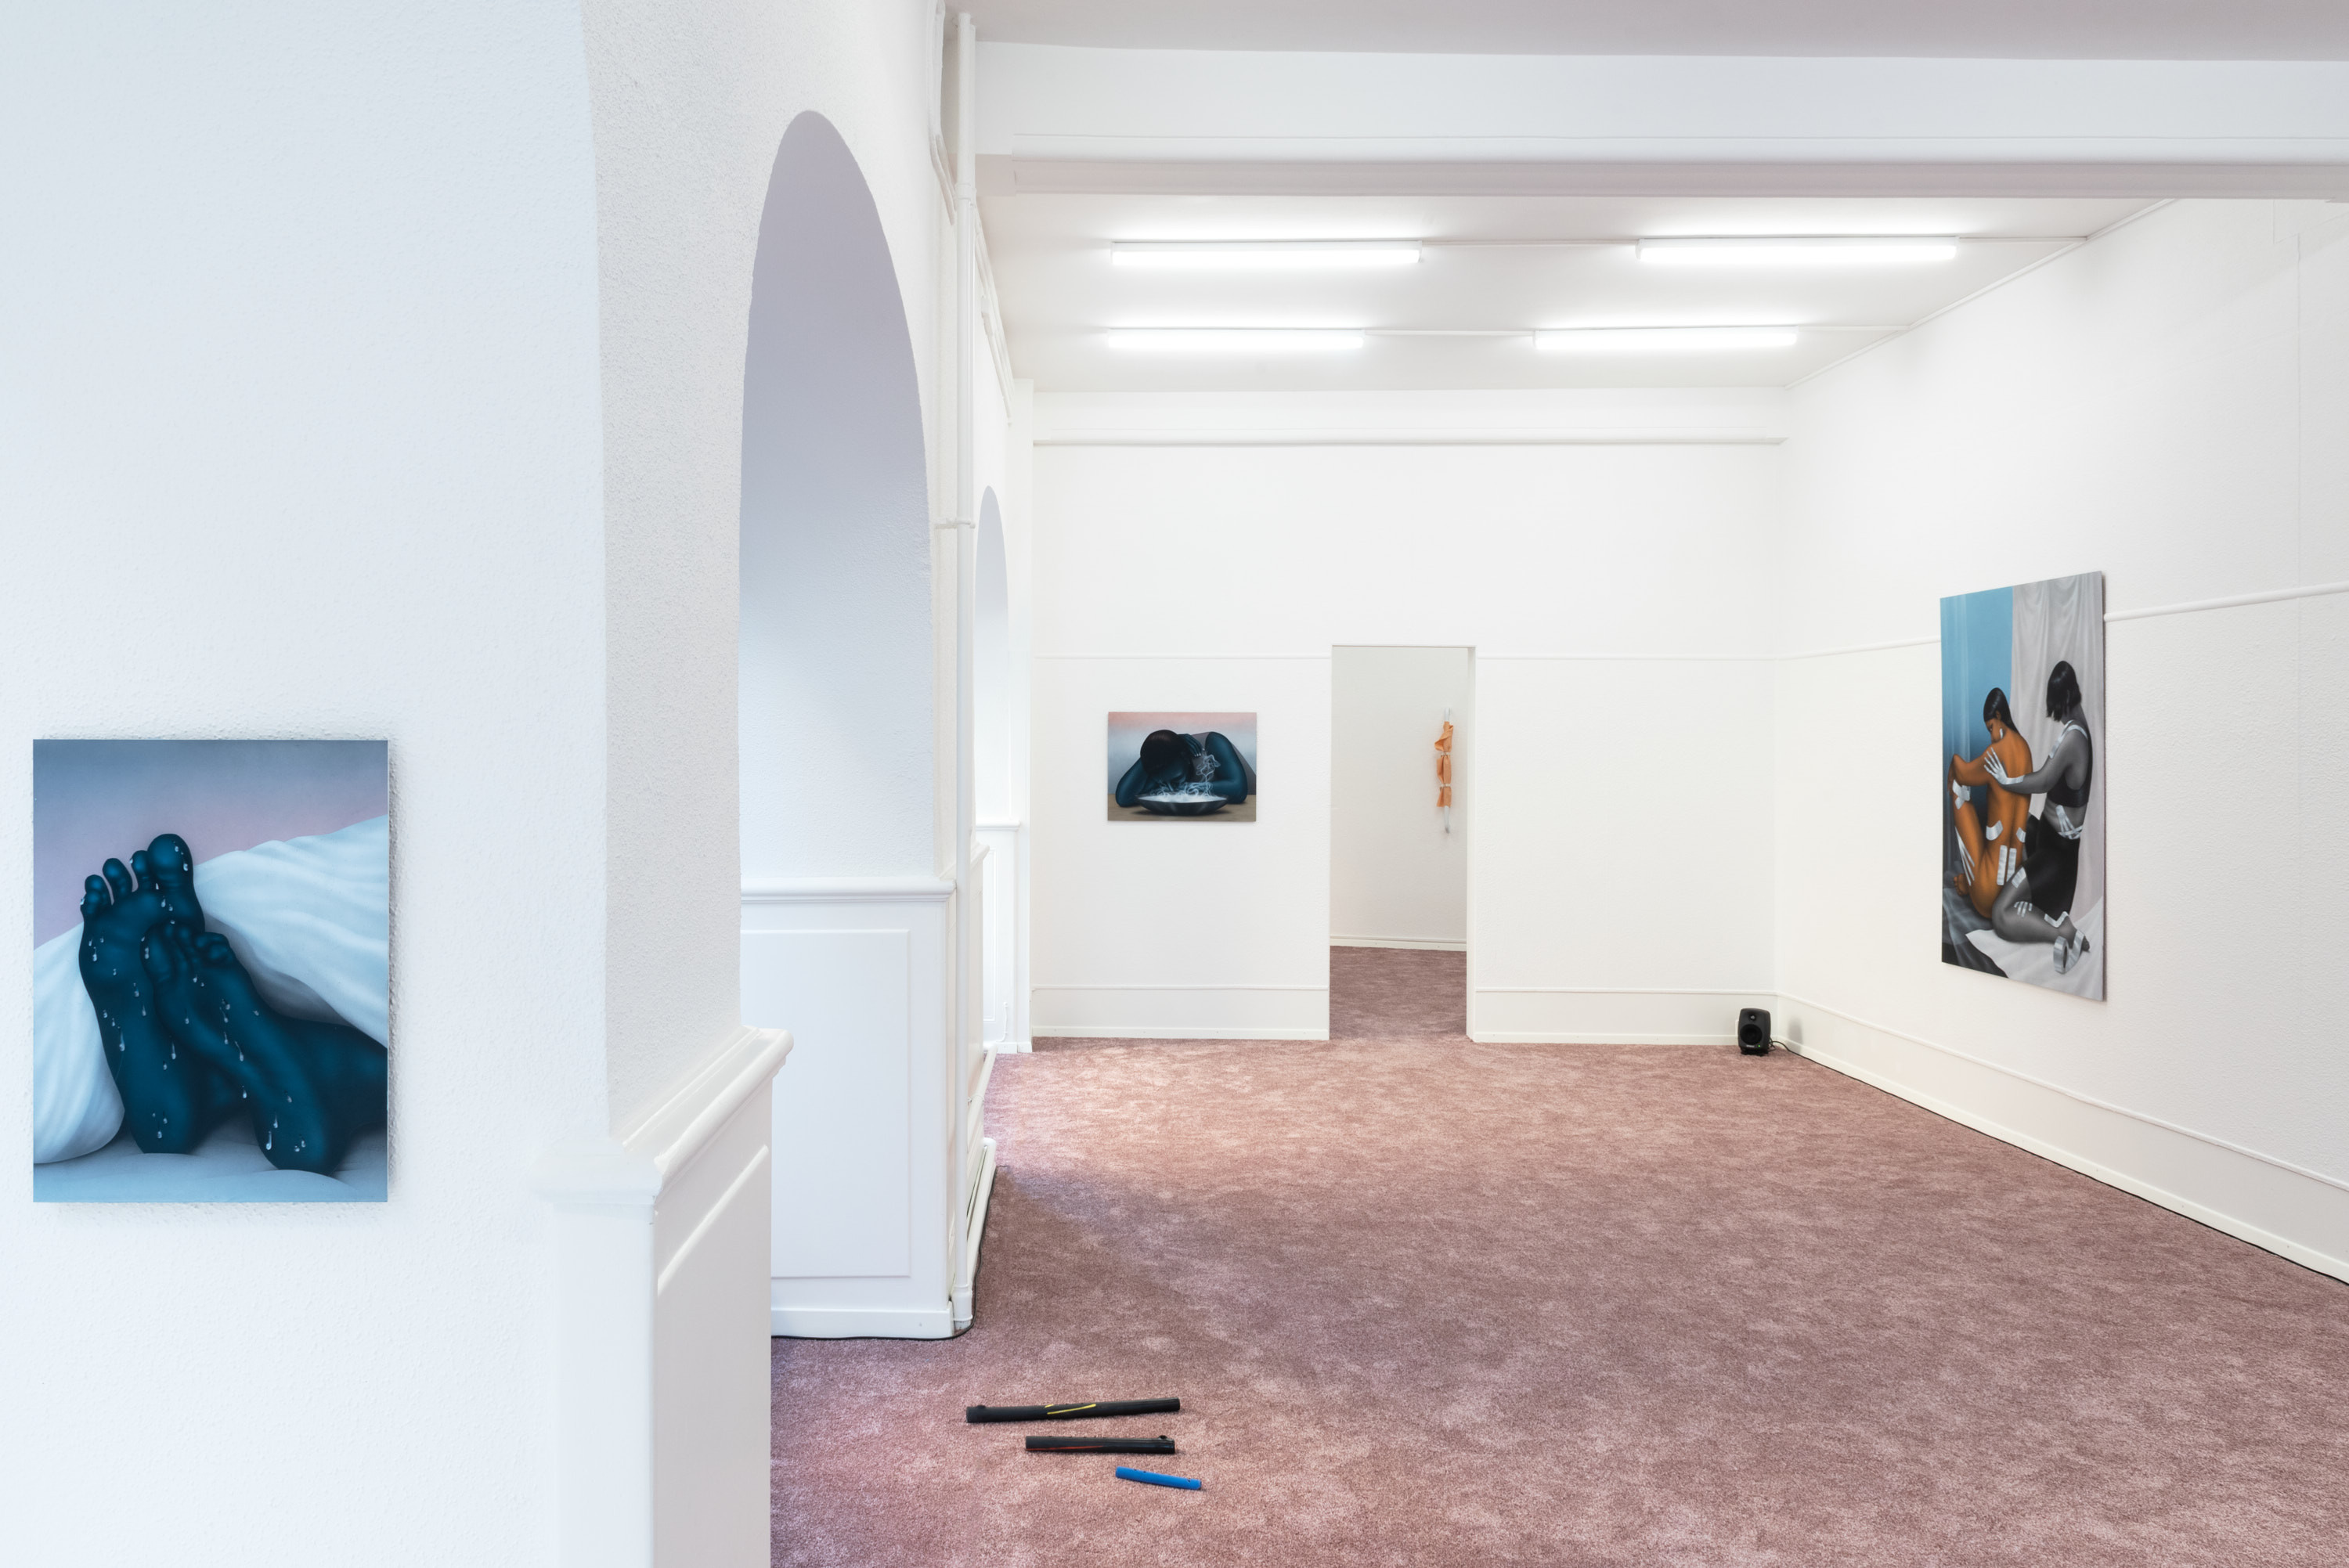 Installation views TIES AND KNOTS AND BANDAGES, 2022. Photo: Â© Thalles Piaget